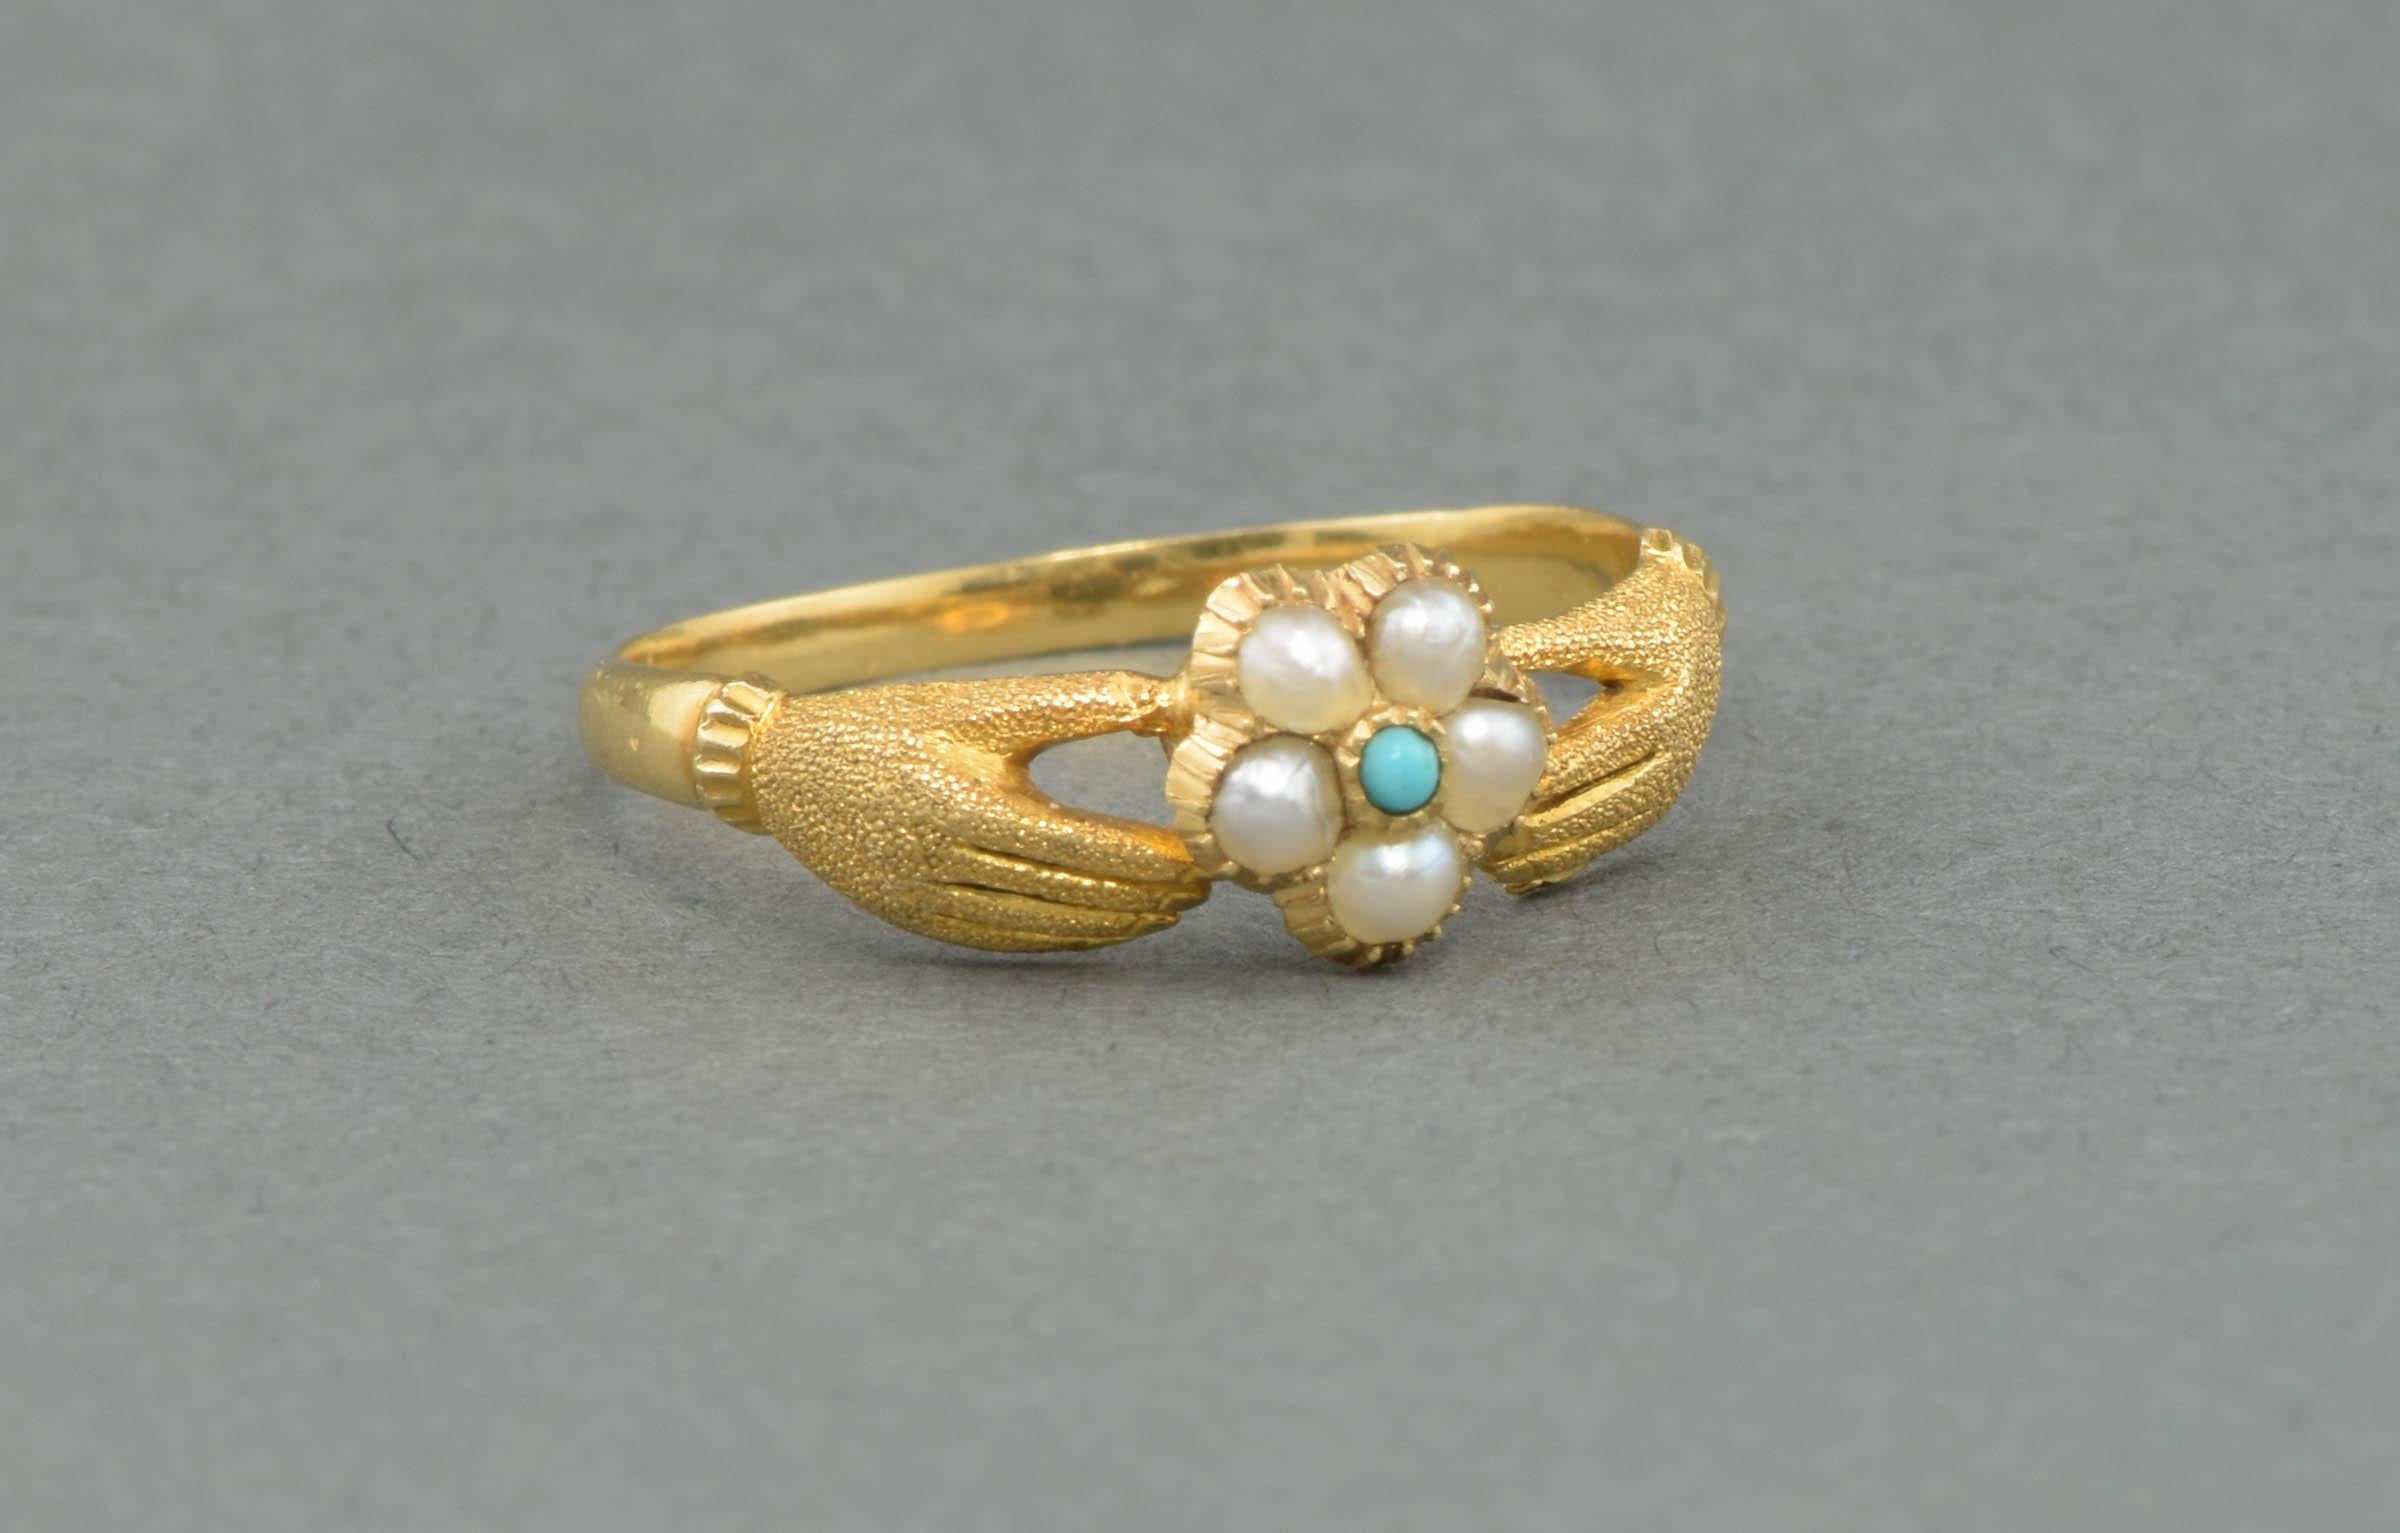 Women's Georgian 14k Gold Fede Ring with Locket Compartment & Pearl & Turquoise Flower